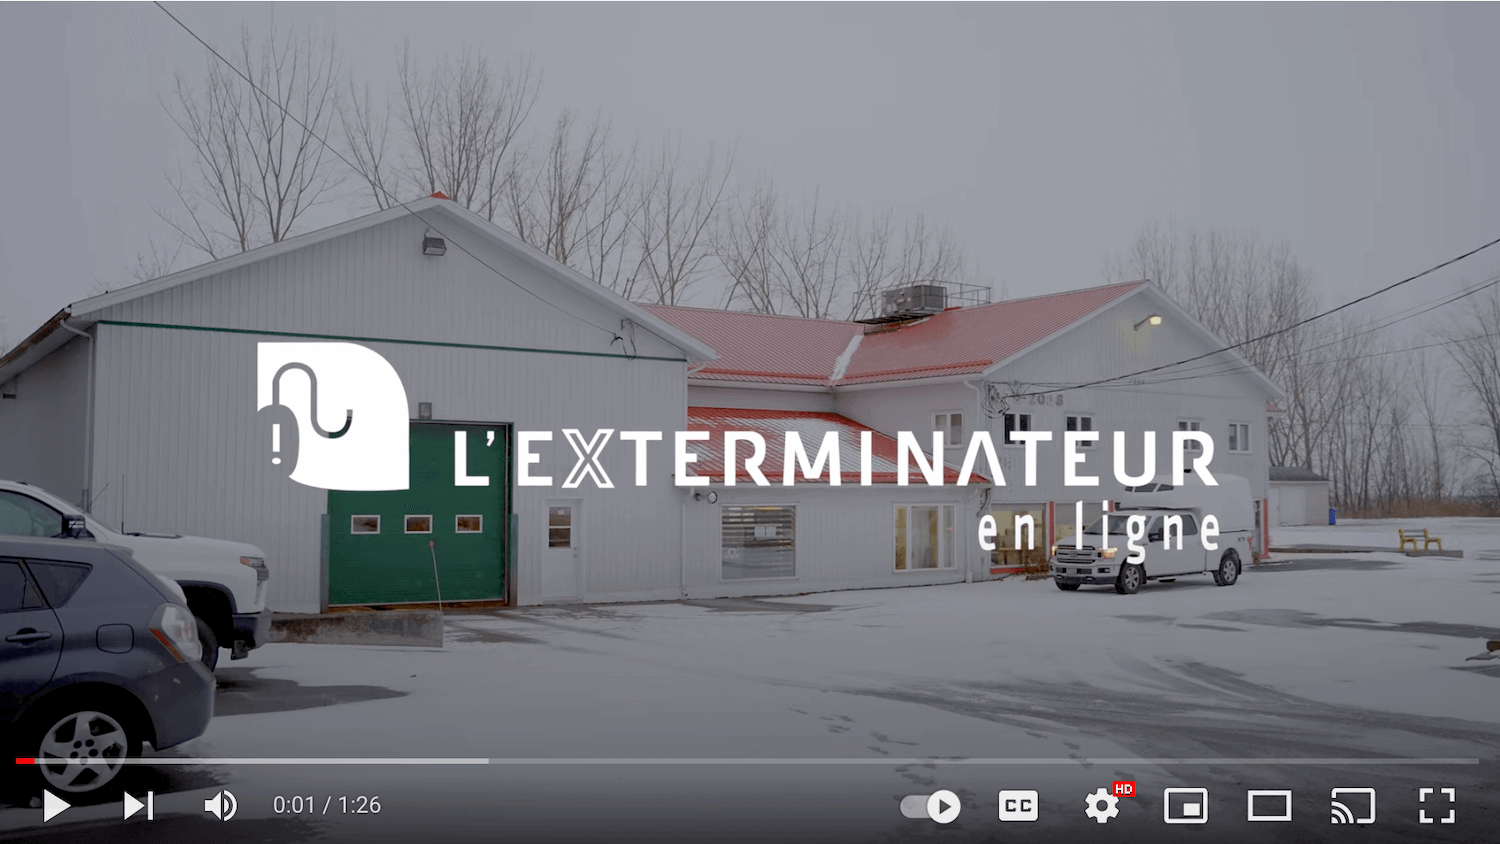 Load video: The online exterminator, a company selling pest control products